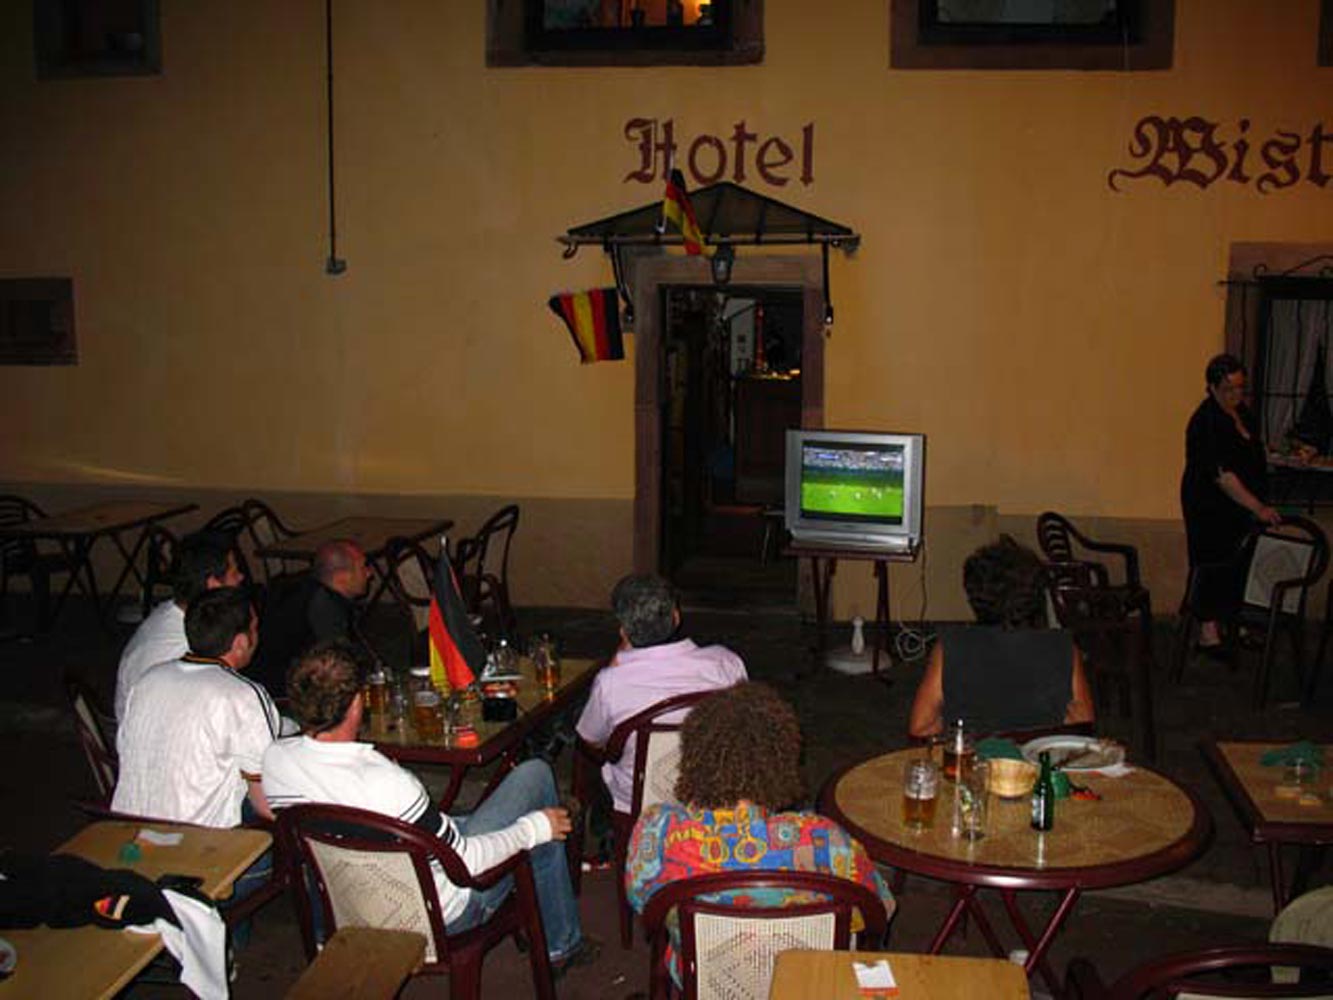 /include/Virtuals/AN2-SM2021/AN2images/POR/Looking-at-the-2008-Soccer-World-Cup-final.jpg